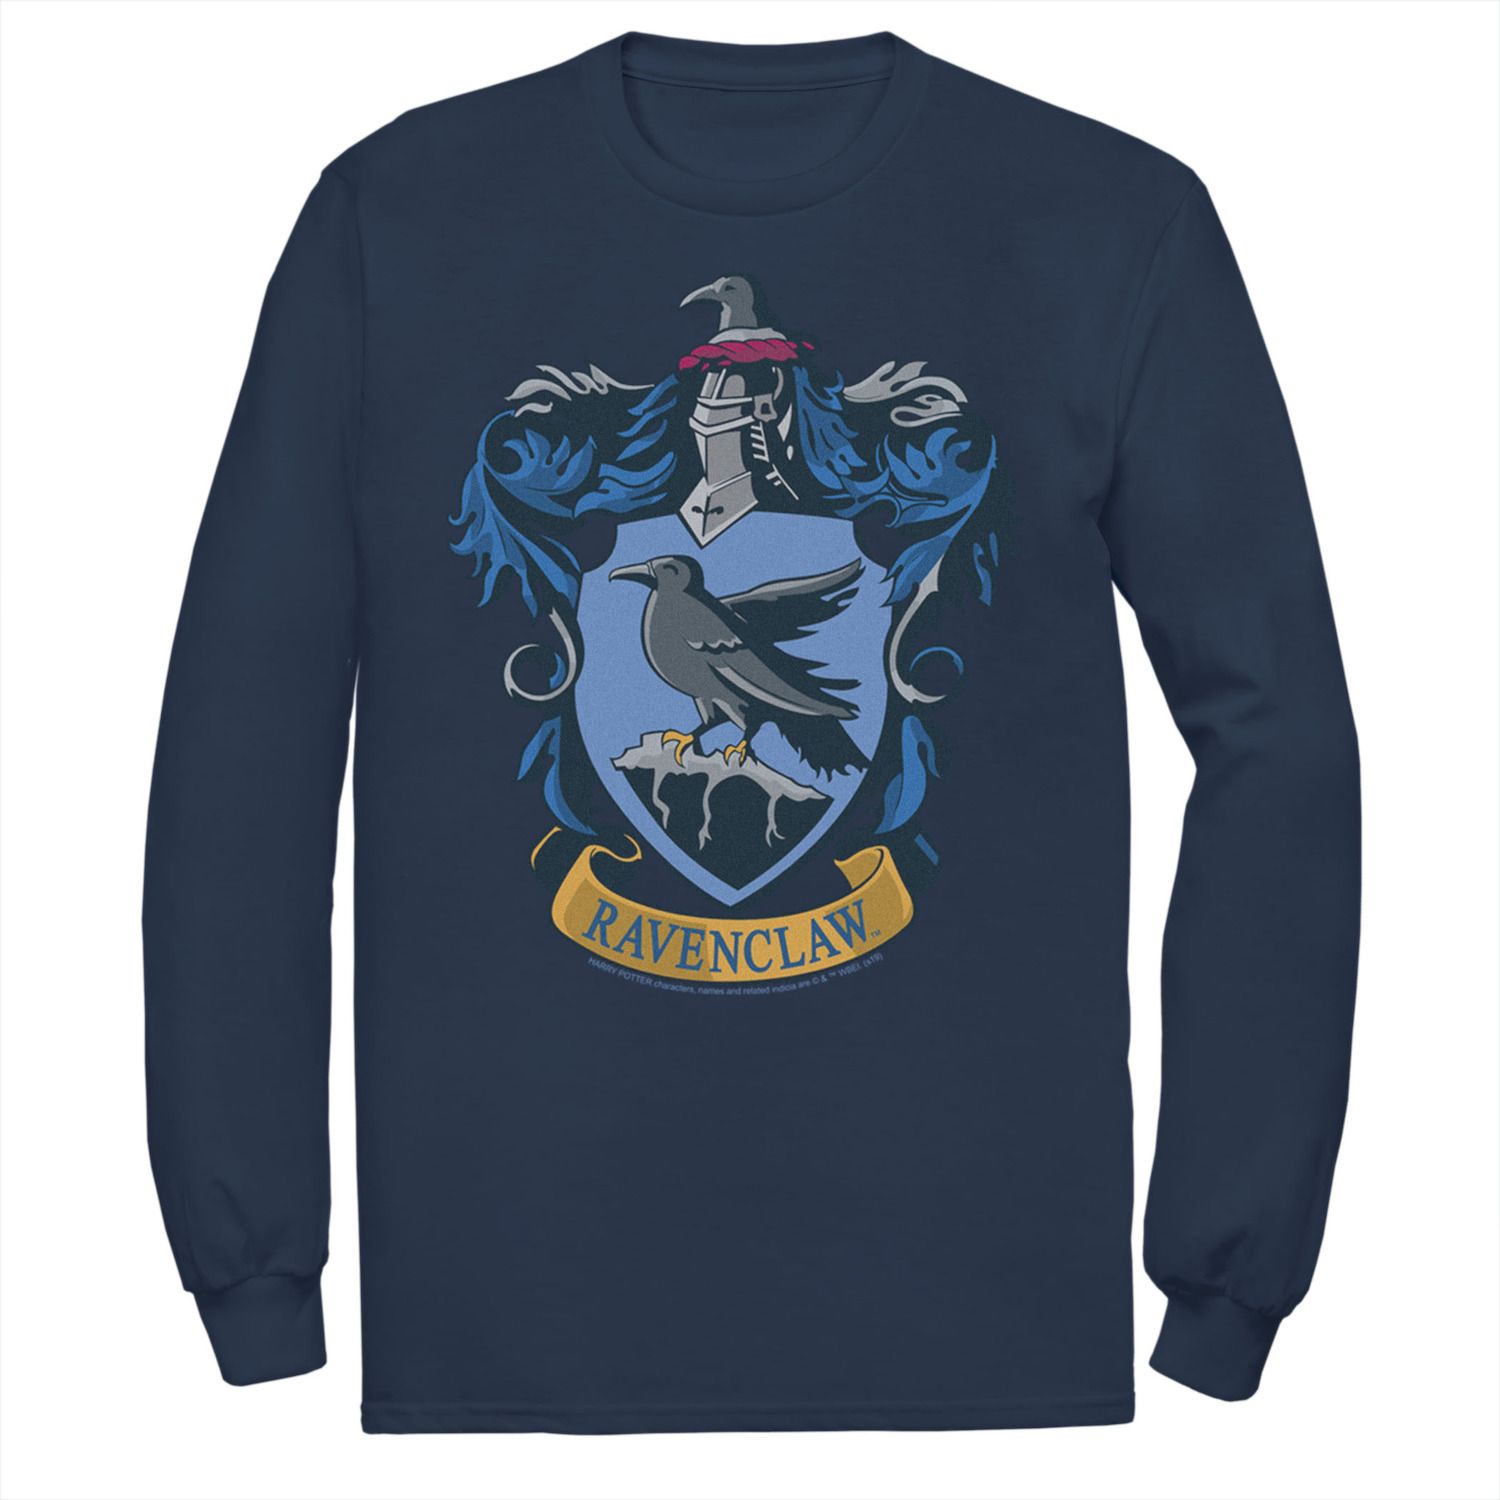 Image for Harry Potter Men's Ravenclaw House Crest Long Sleeve Graphic Tee at Kohl's.